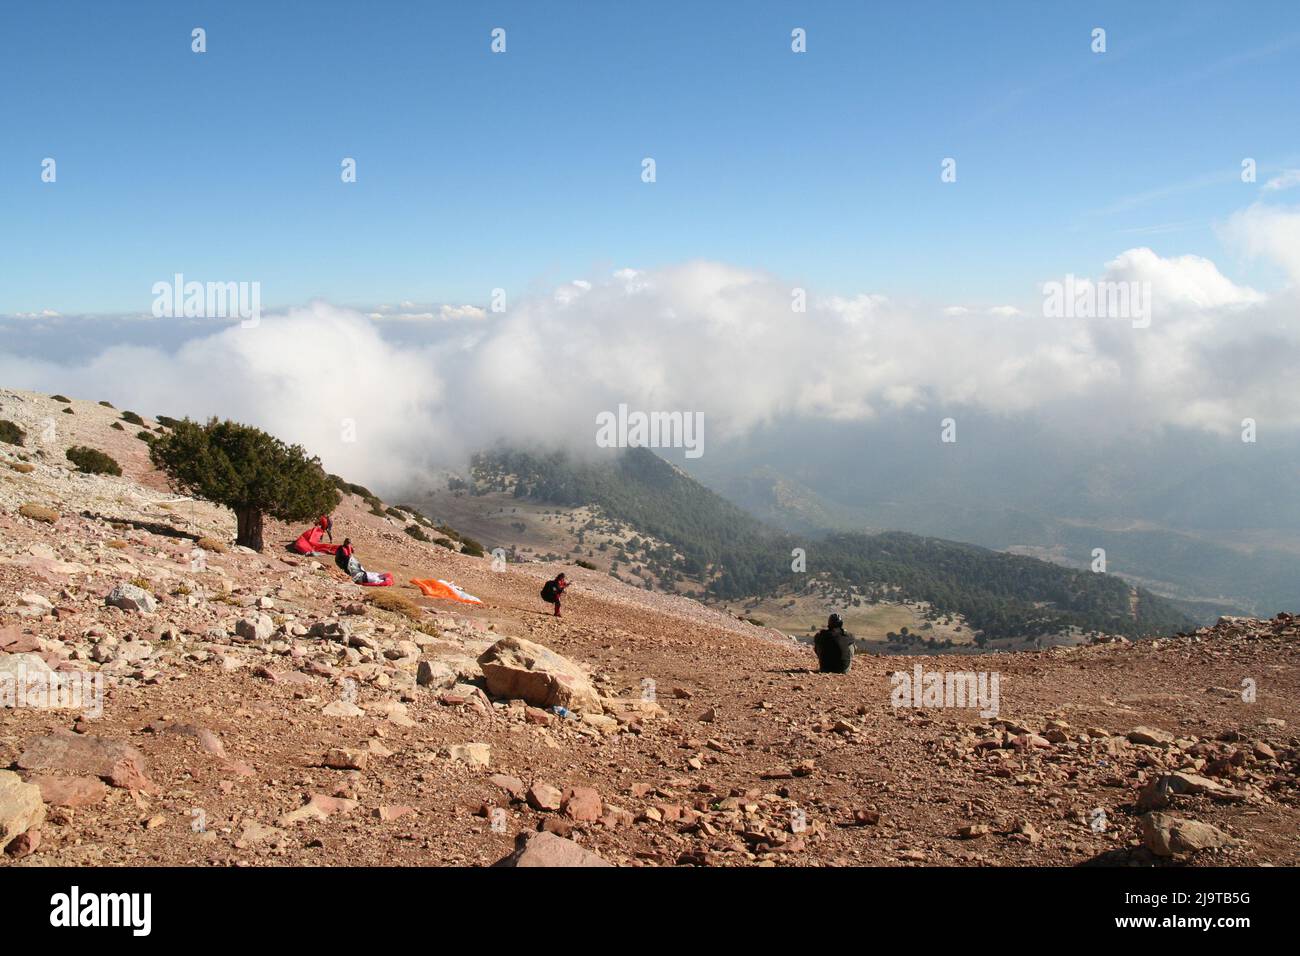 Preparing for Paraglider Take off on Mountain top. Stock Photo